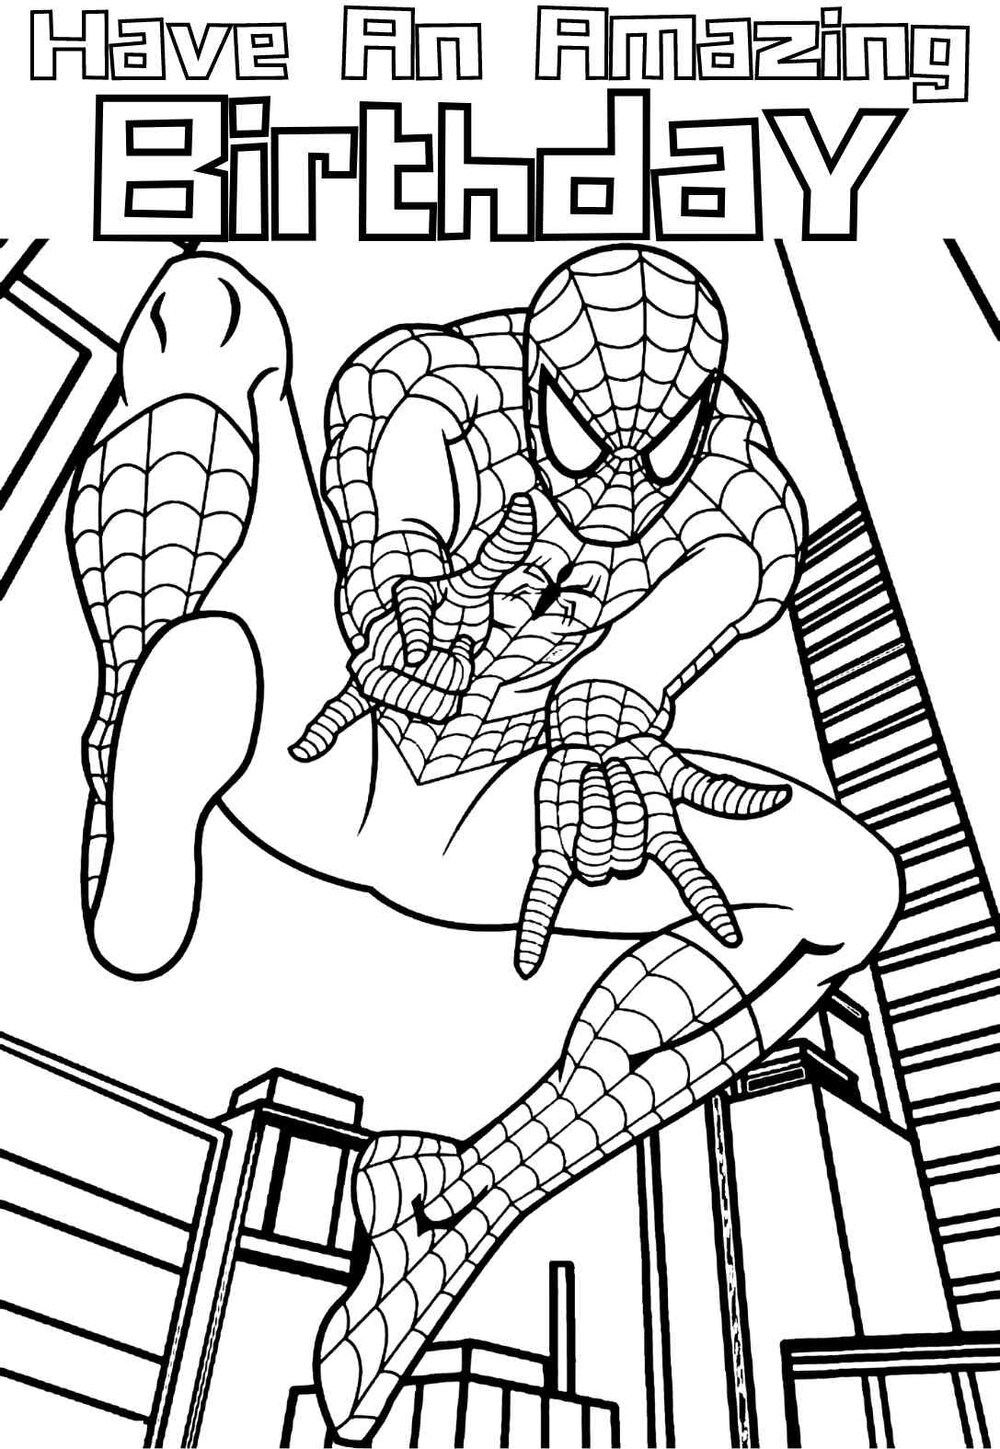 20 Spectacular Spiderman Birthday Coloring Pages & Cards free ...